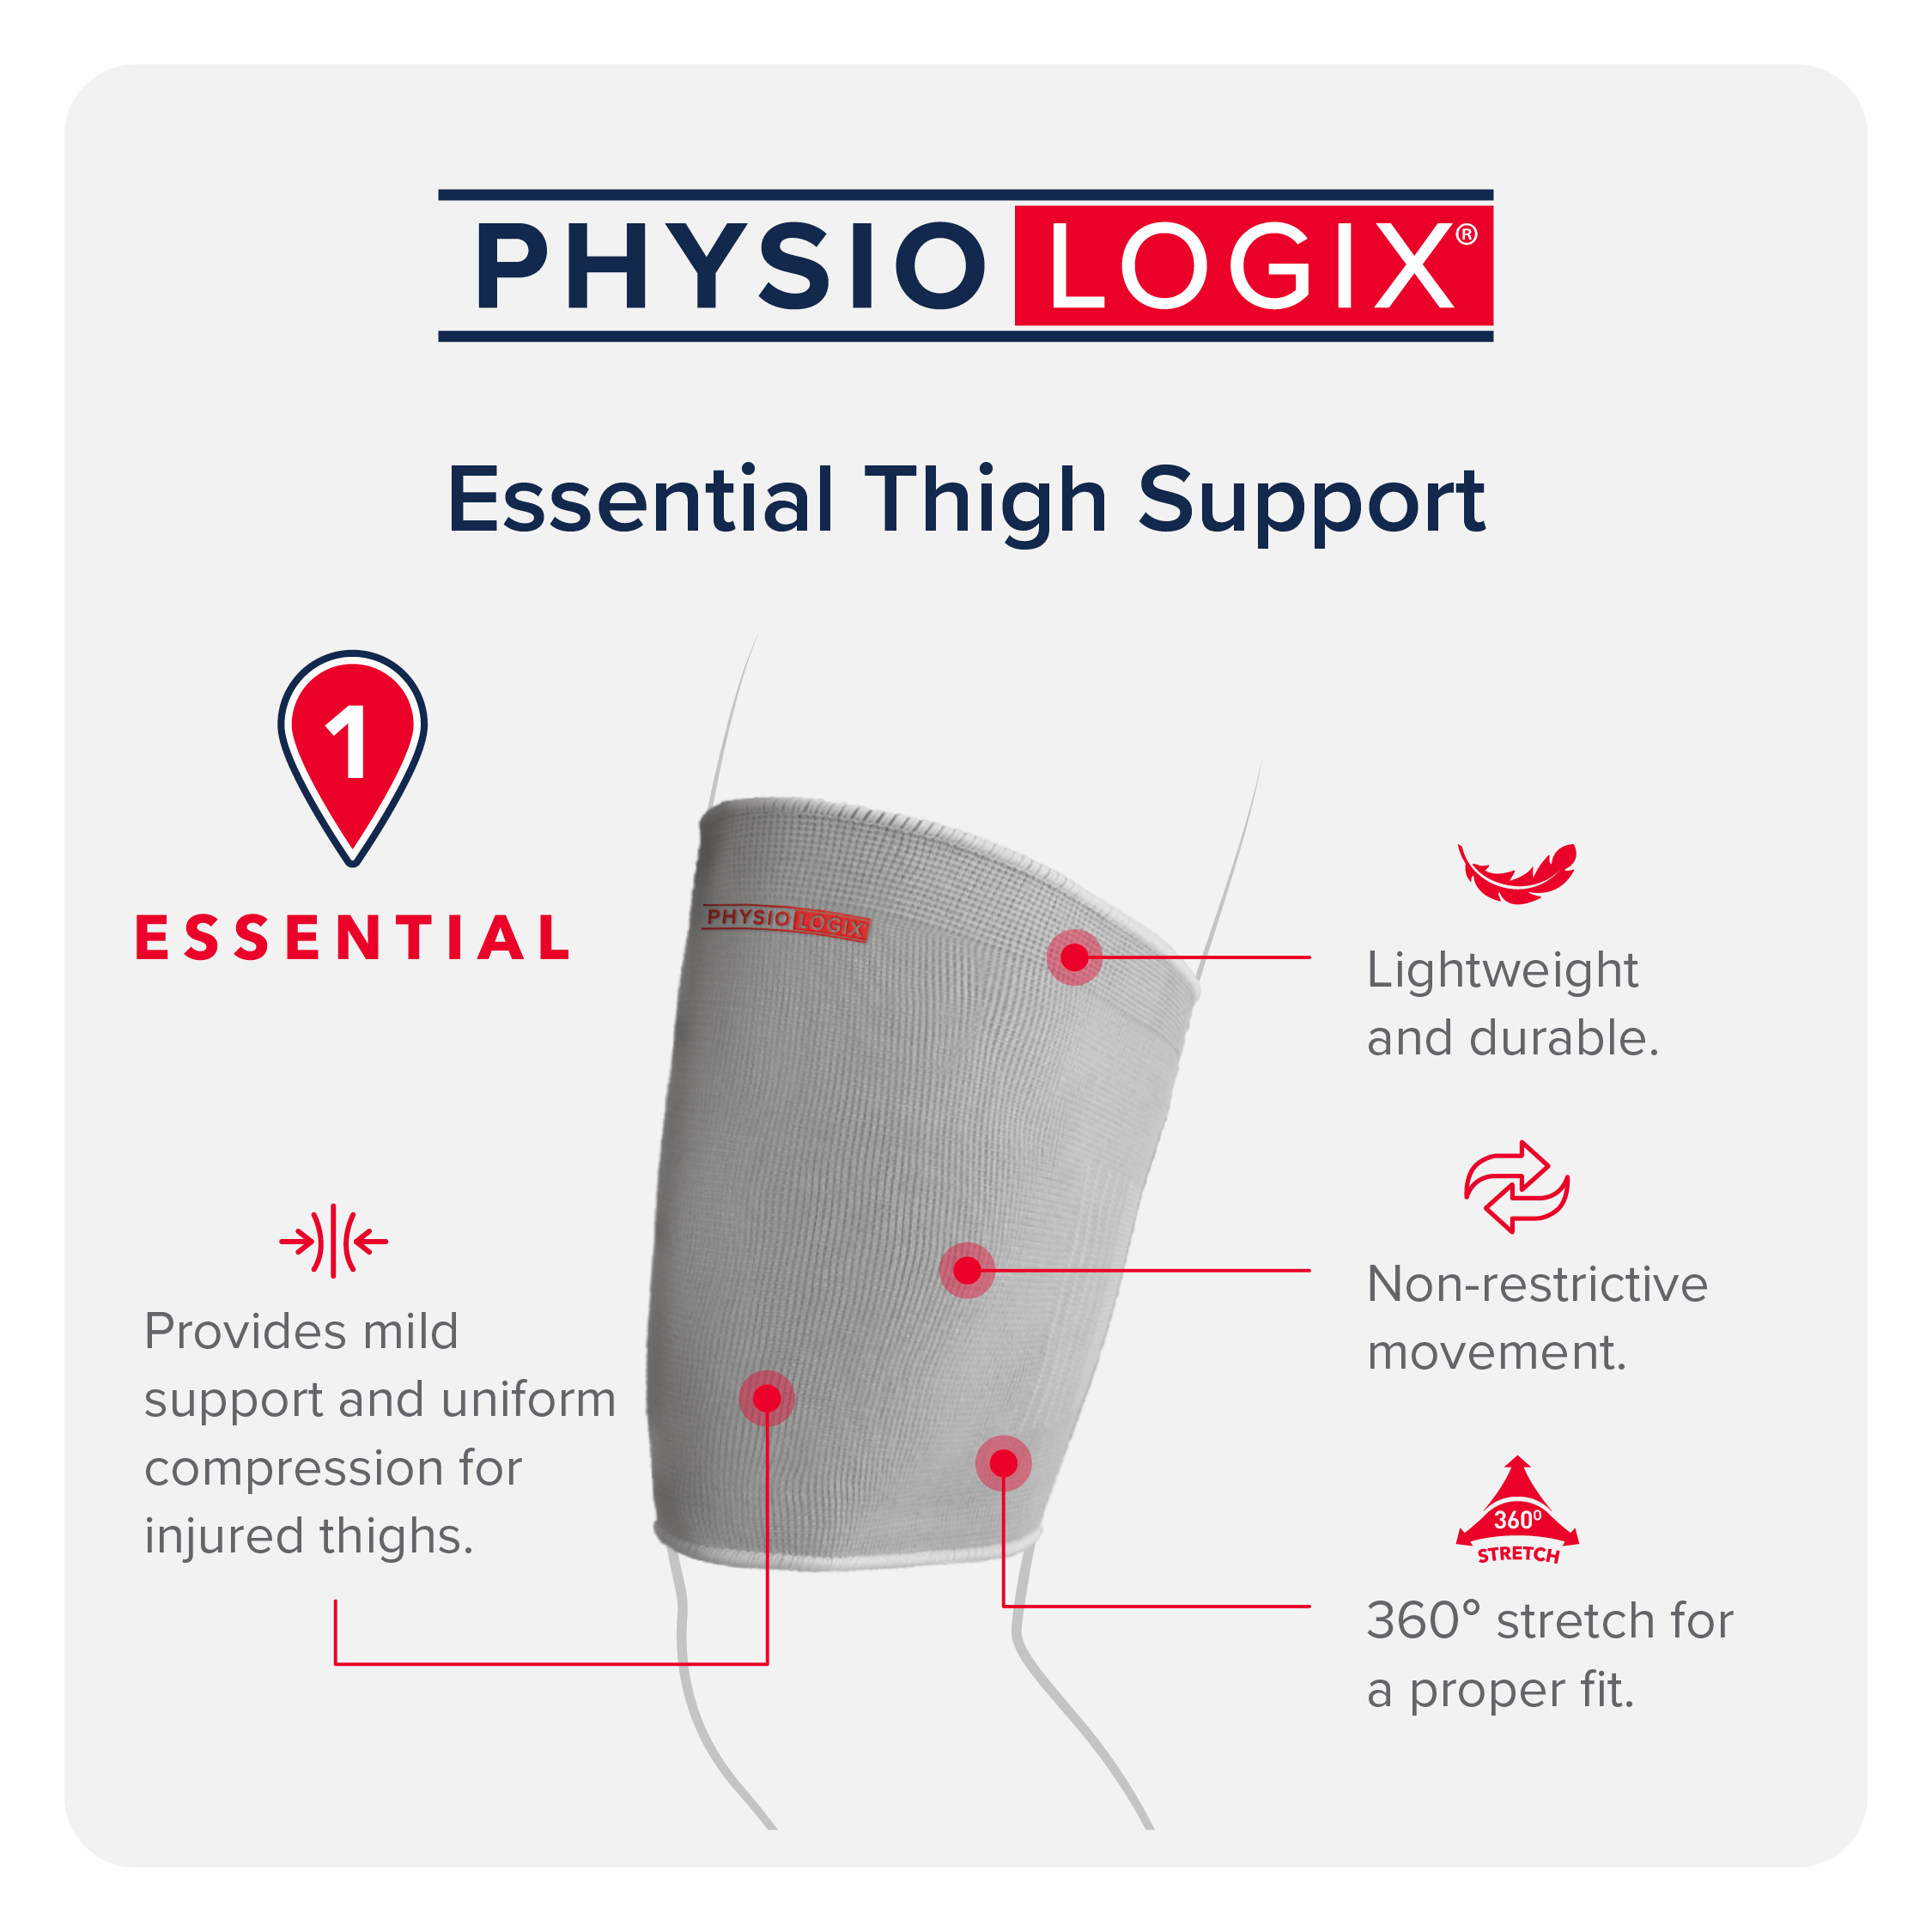 Physiologix Essential Thigh Support Features